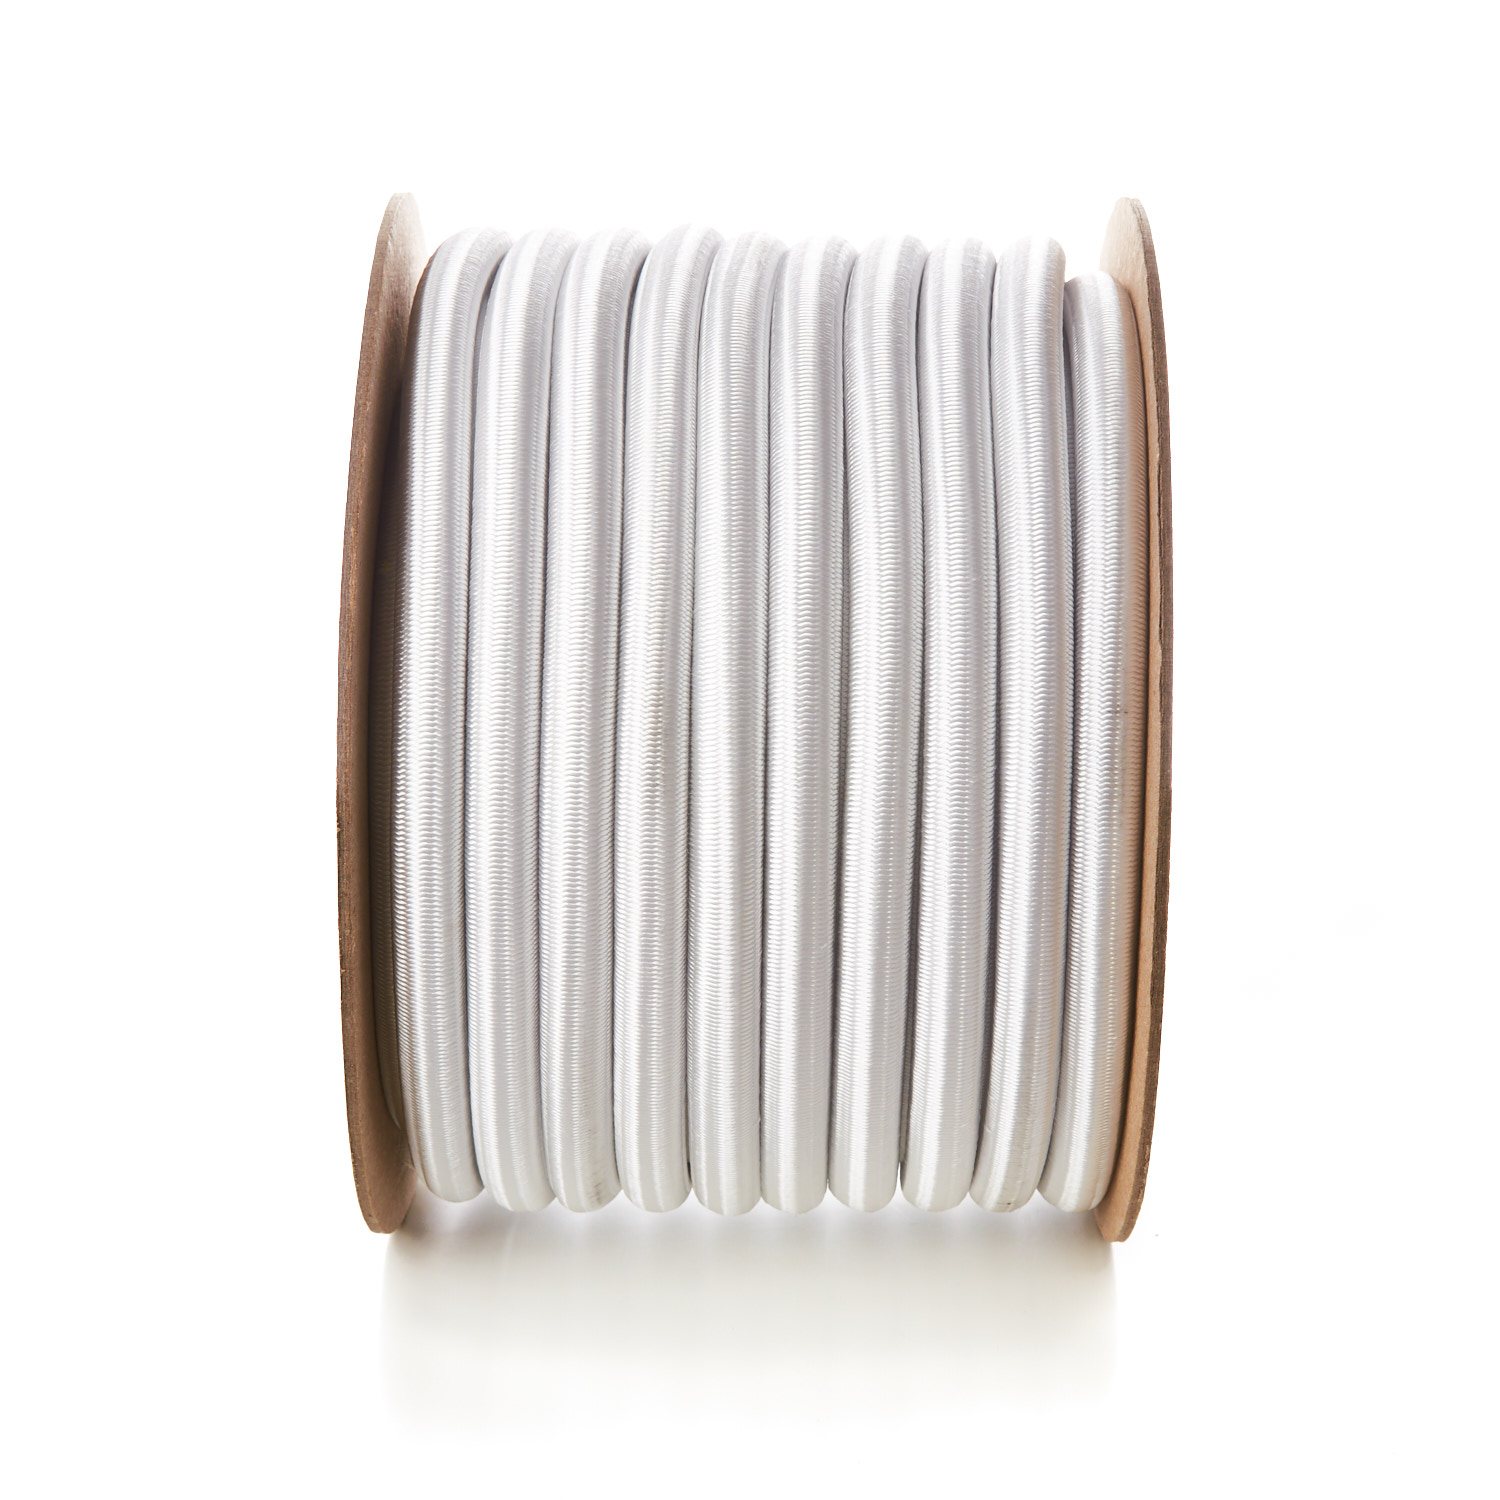 Round 14mm Elastic Bungee Shock Cord White Natural Roll UK Manufactured PE160